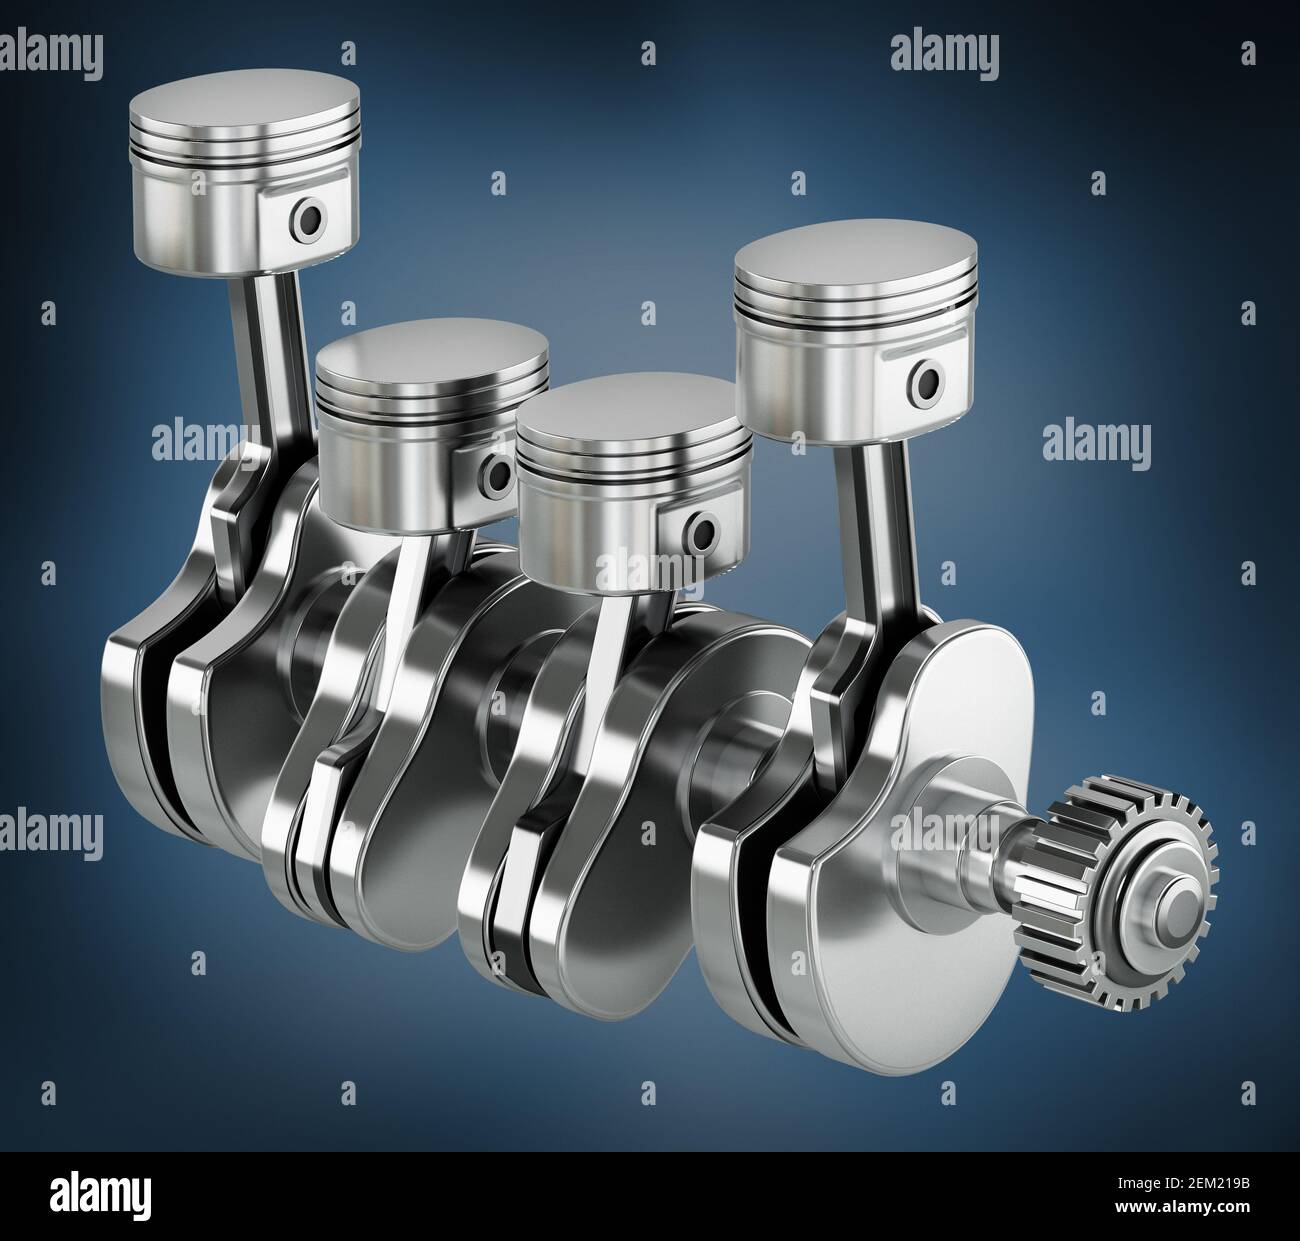 3D illustration of a car engine block and pistons. 3D illustration. Stock Photo